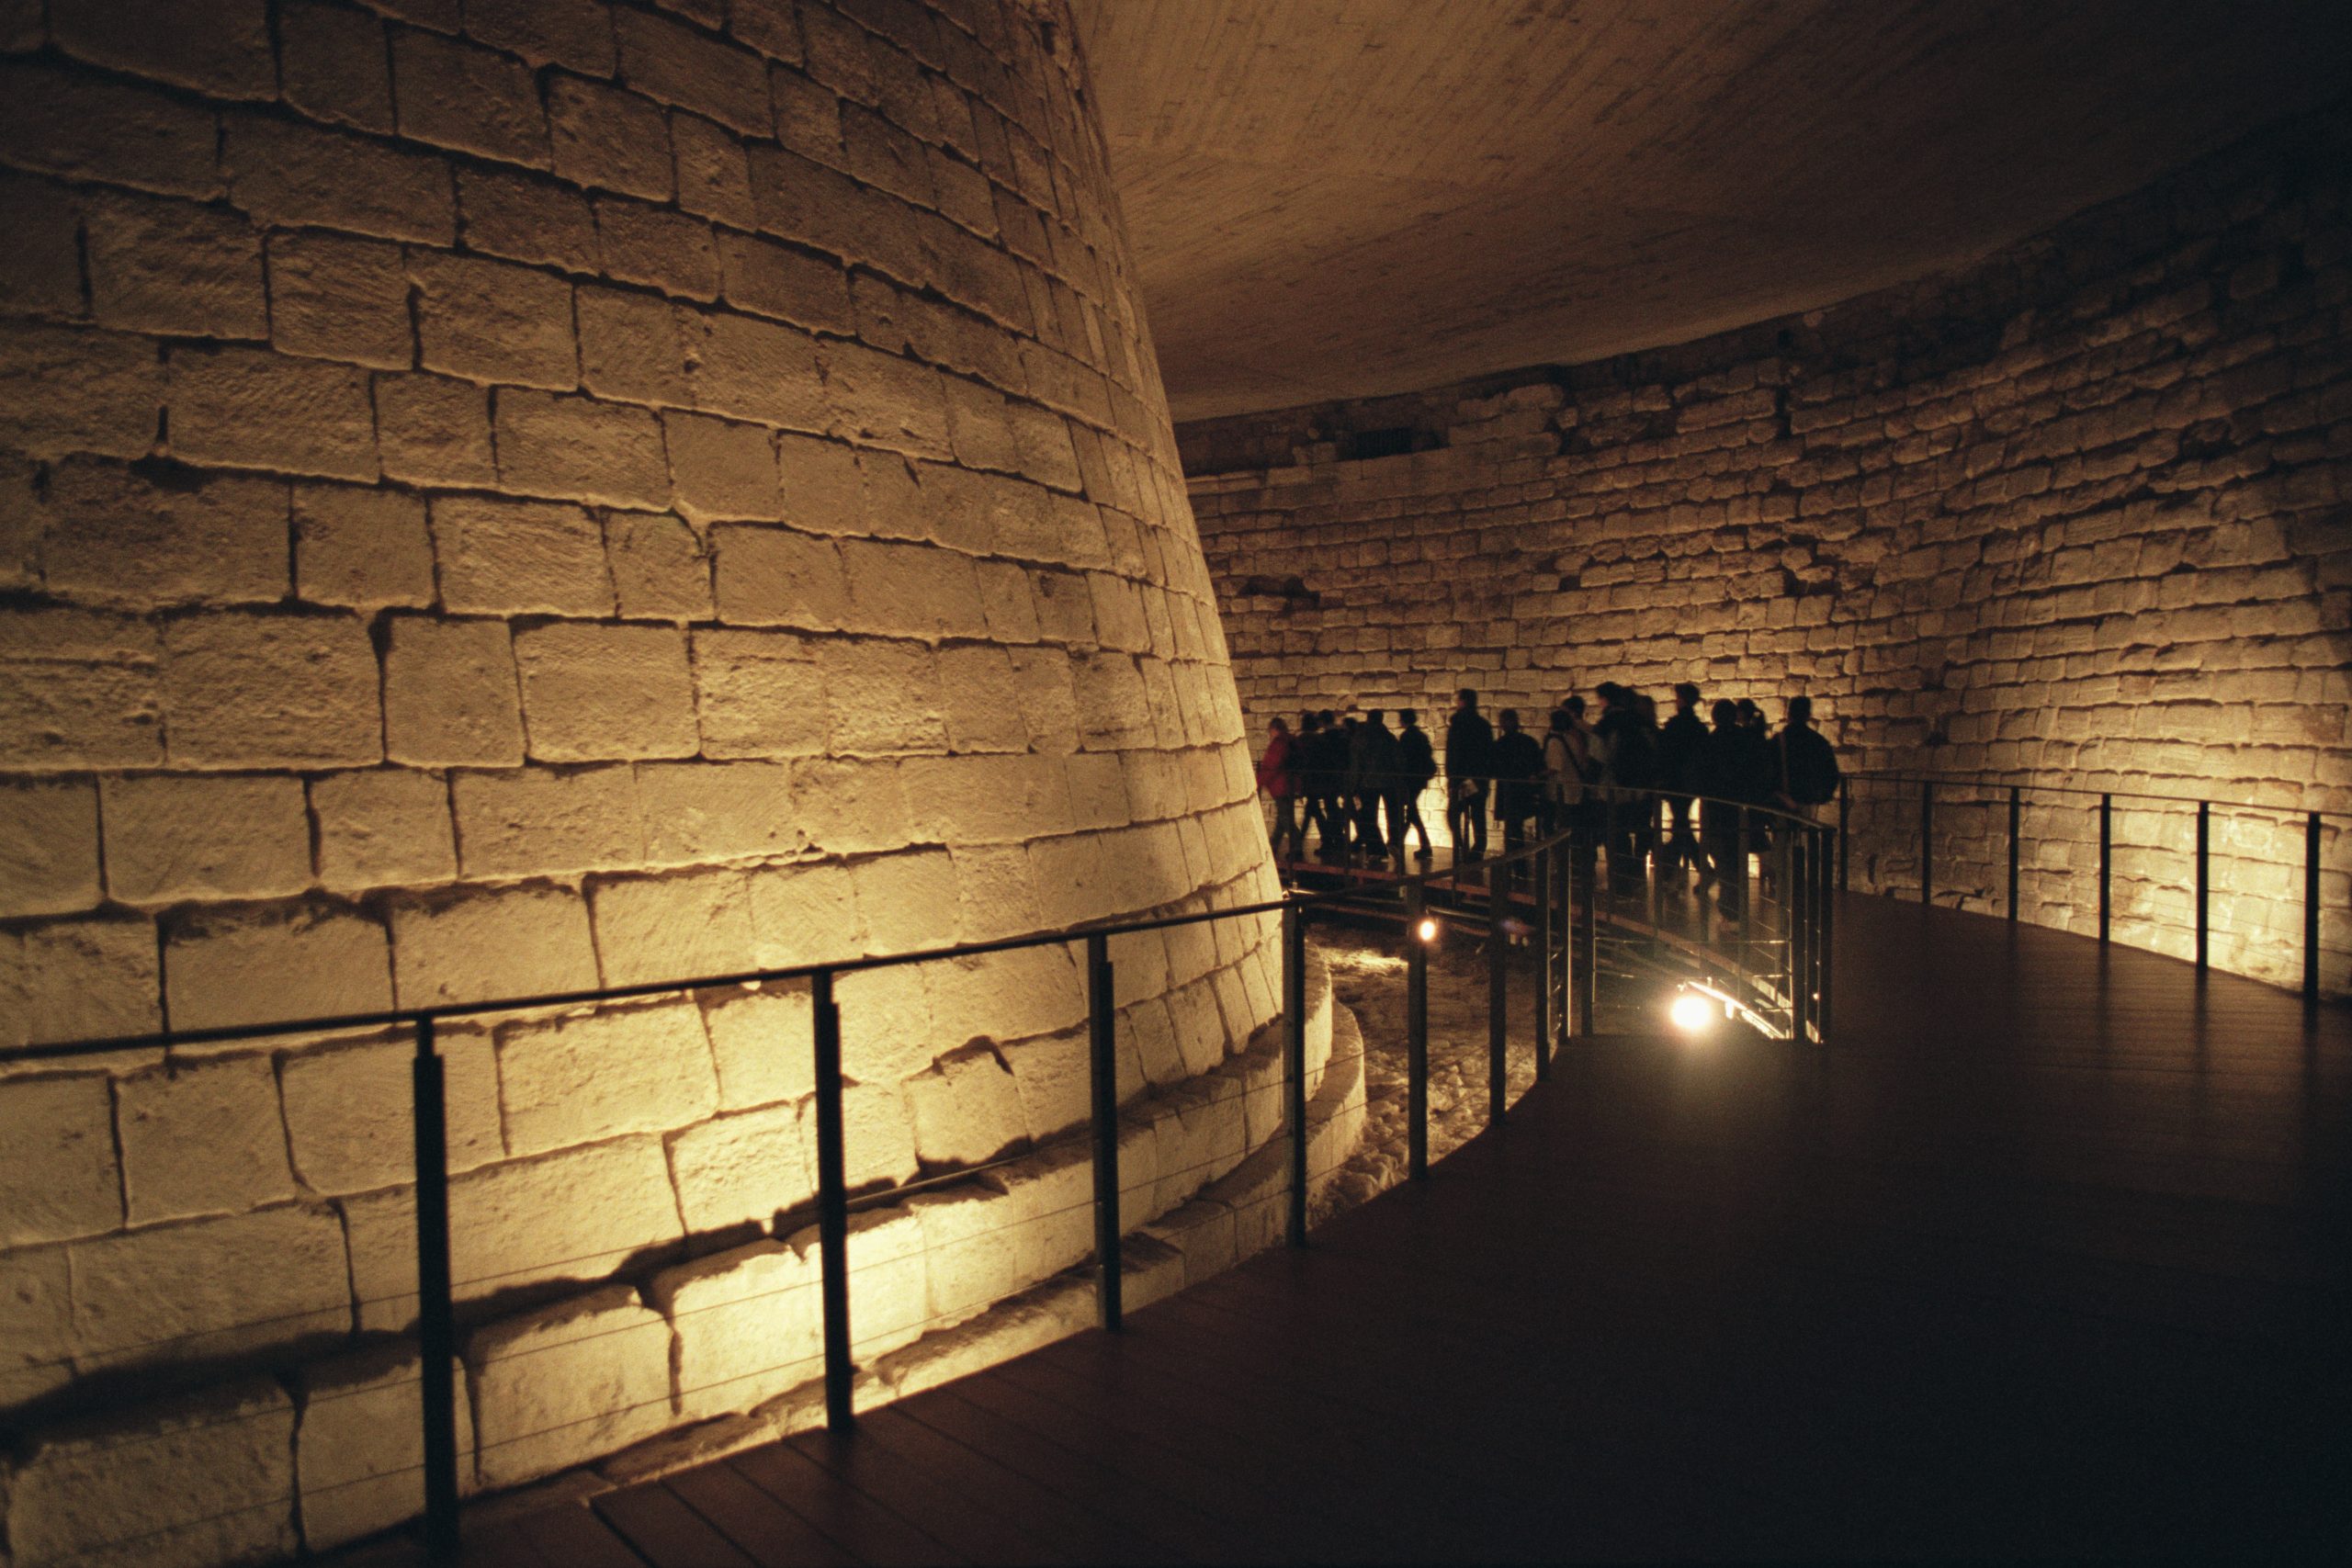 (Original Caption) The Medieval Louvre: The dungeon moat. (Photo by Bernard Annebicque/Sygma/Sygma via Getty Images)